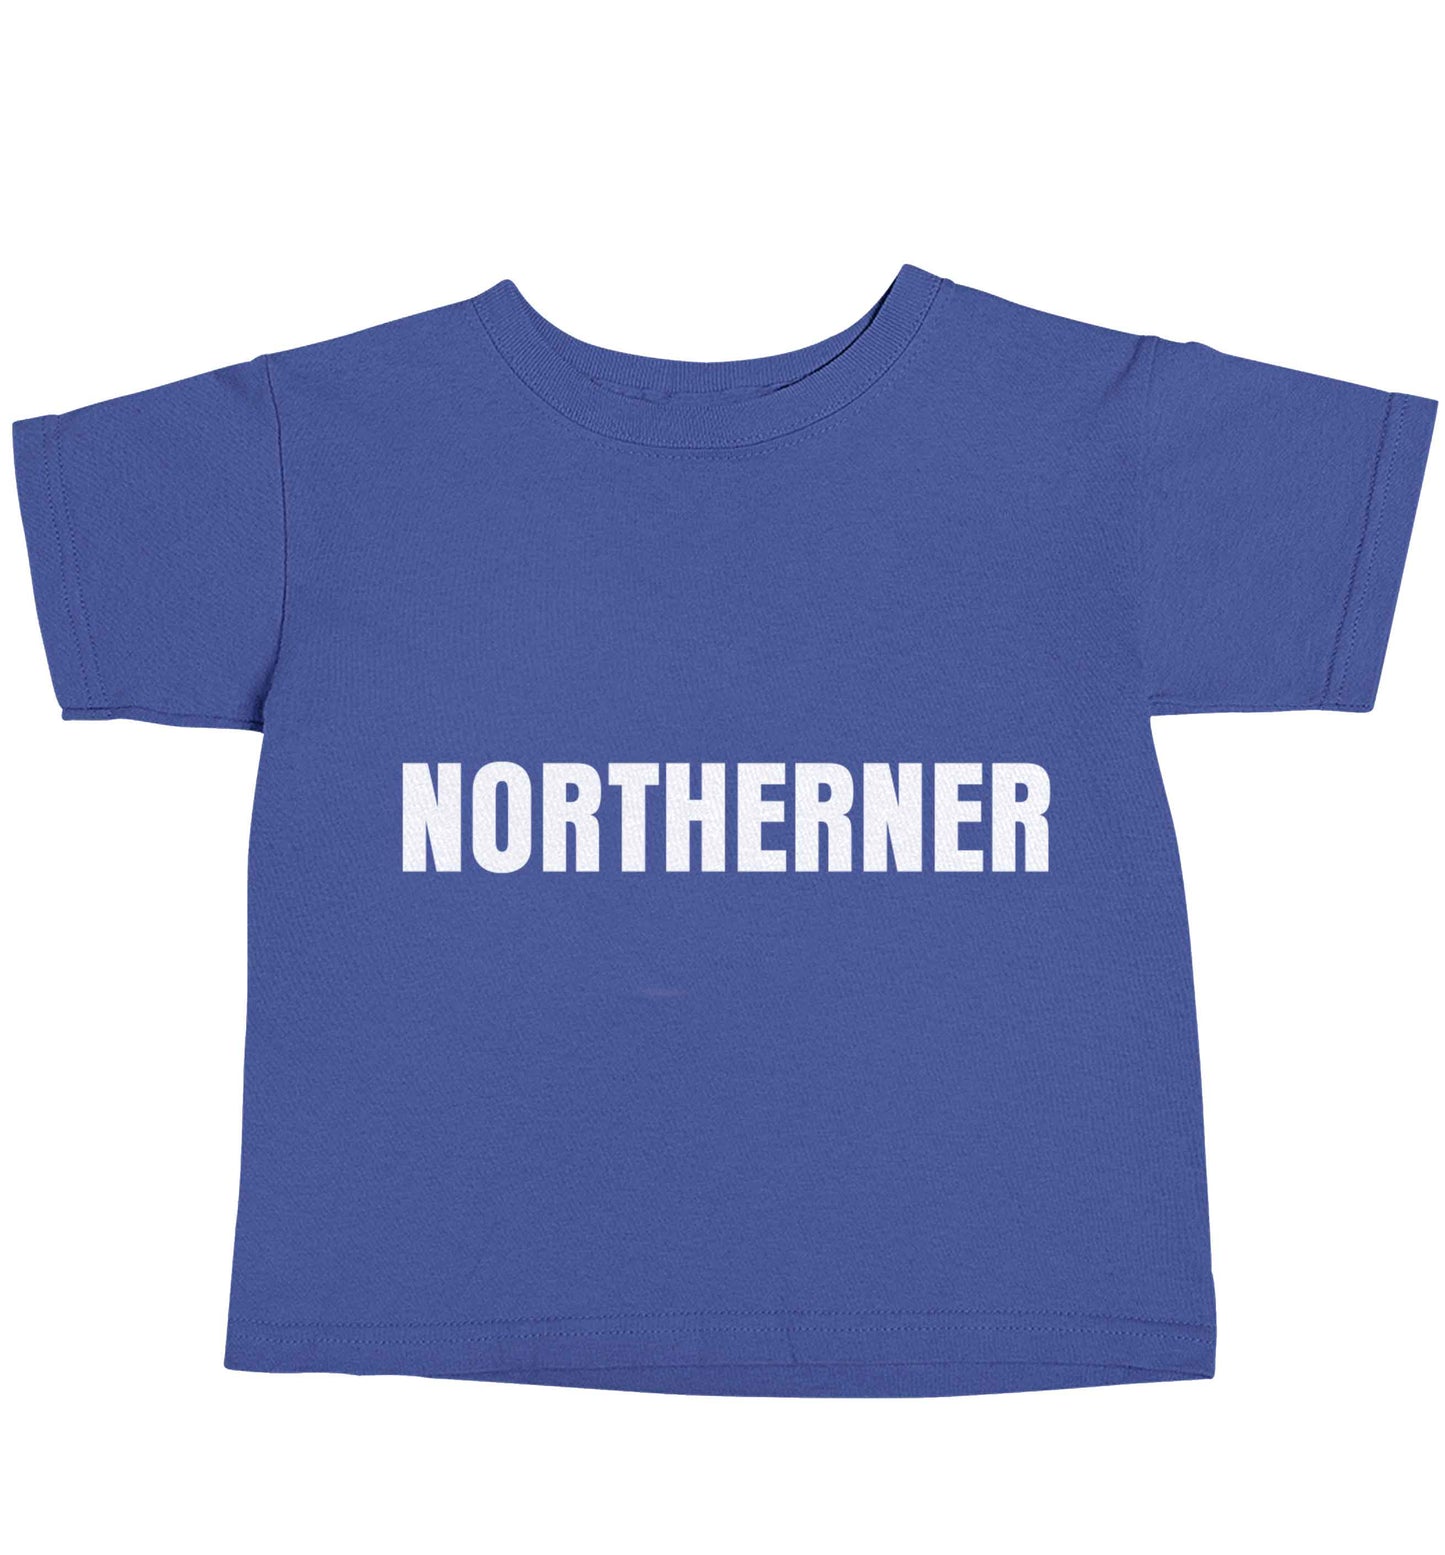 Northerner blue baby toddler Tshirt 2 Years